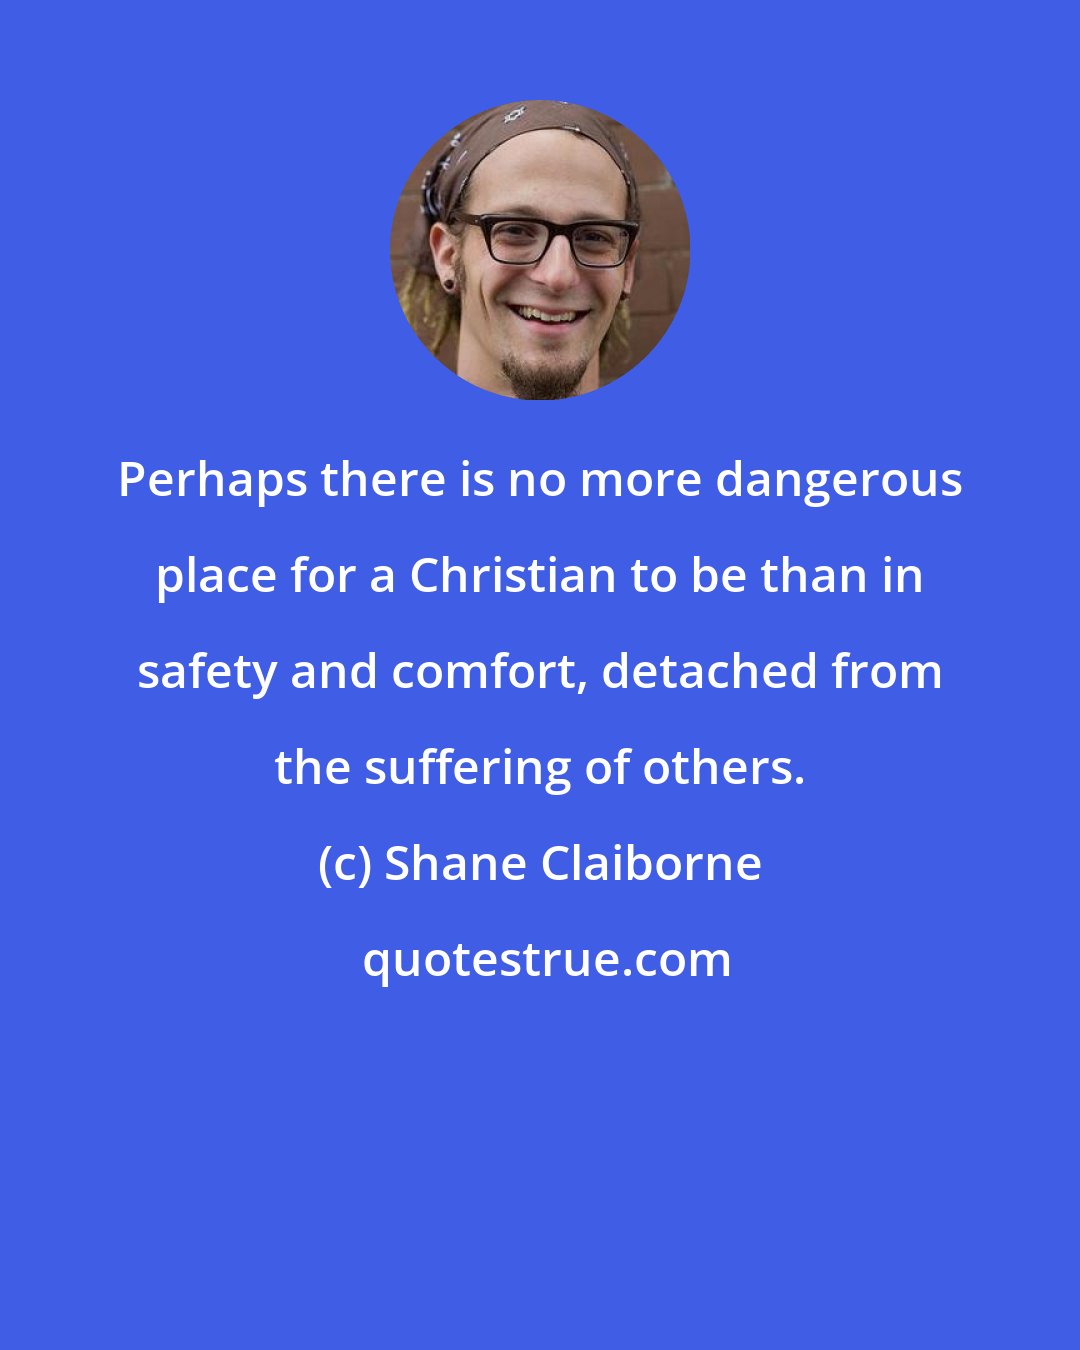 Shane Claiborne: Perhaps there is no more dangerous place for a Christian to be than in safety and comfort, detached from the suffering of others.